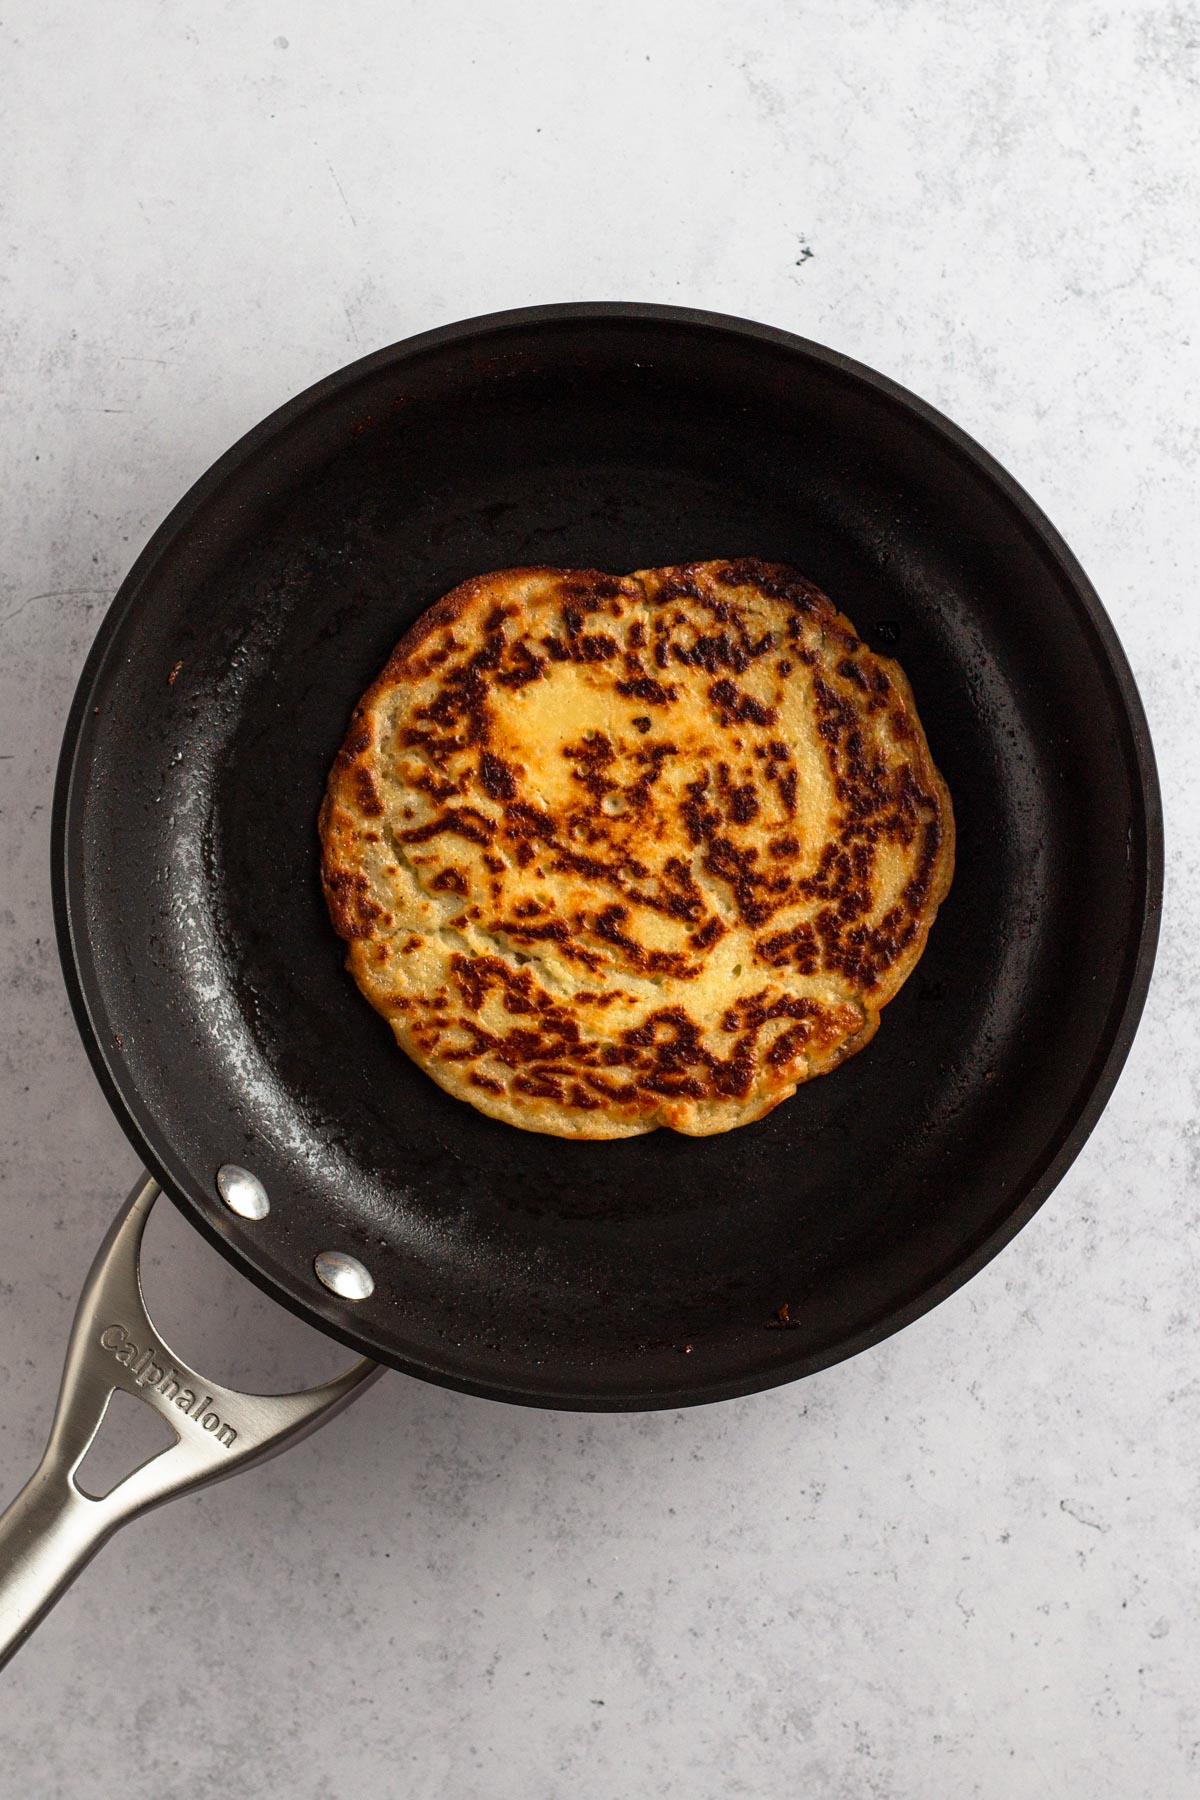 cooked pancake in a skillet